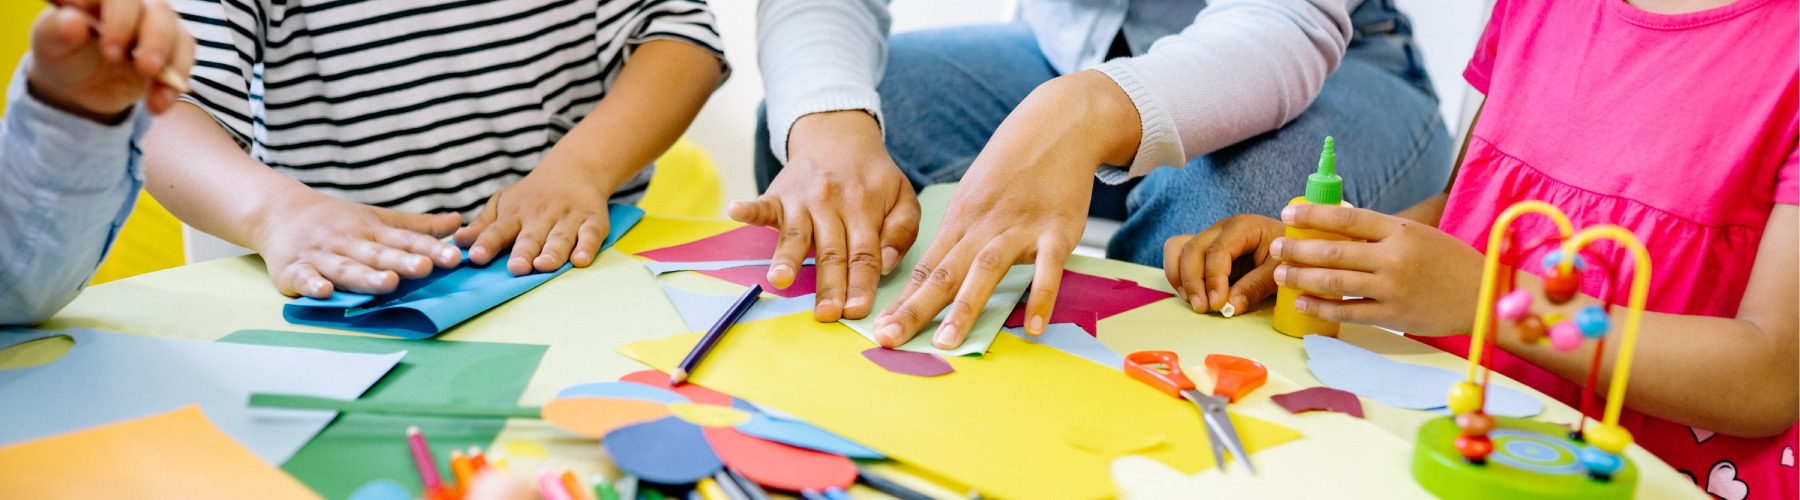 students hands cutting and folding construction paper on arts and crafts tableour school